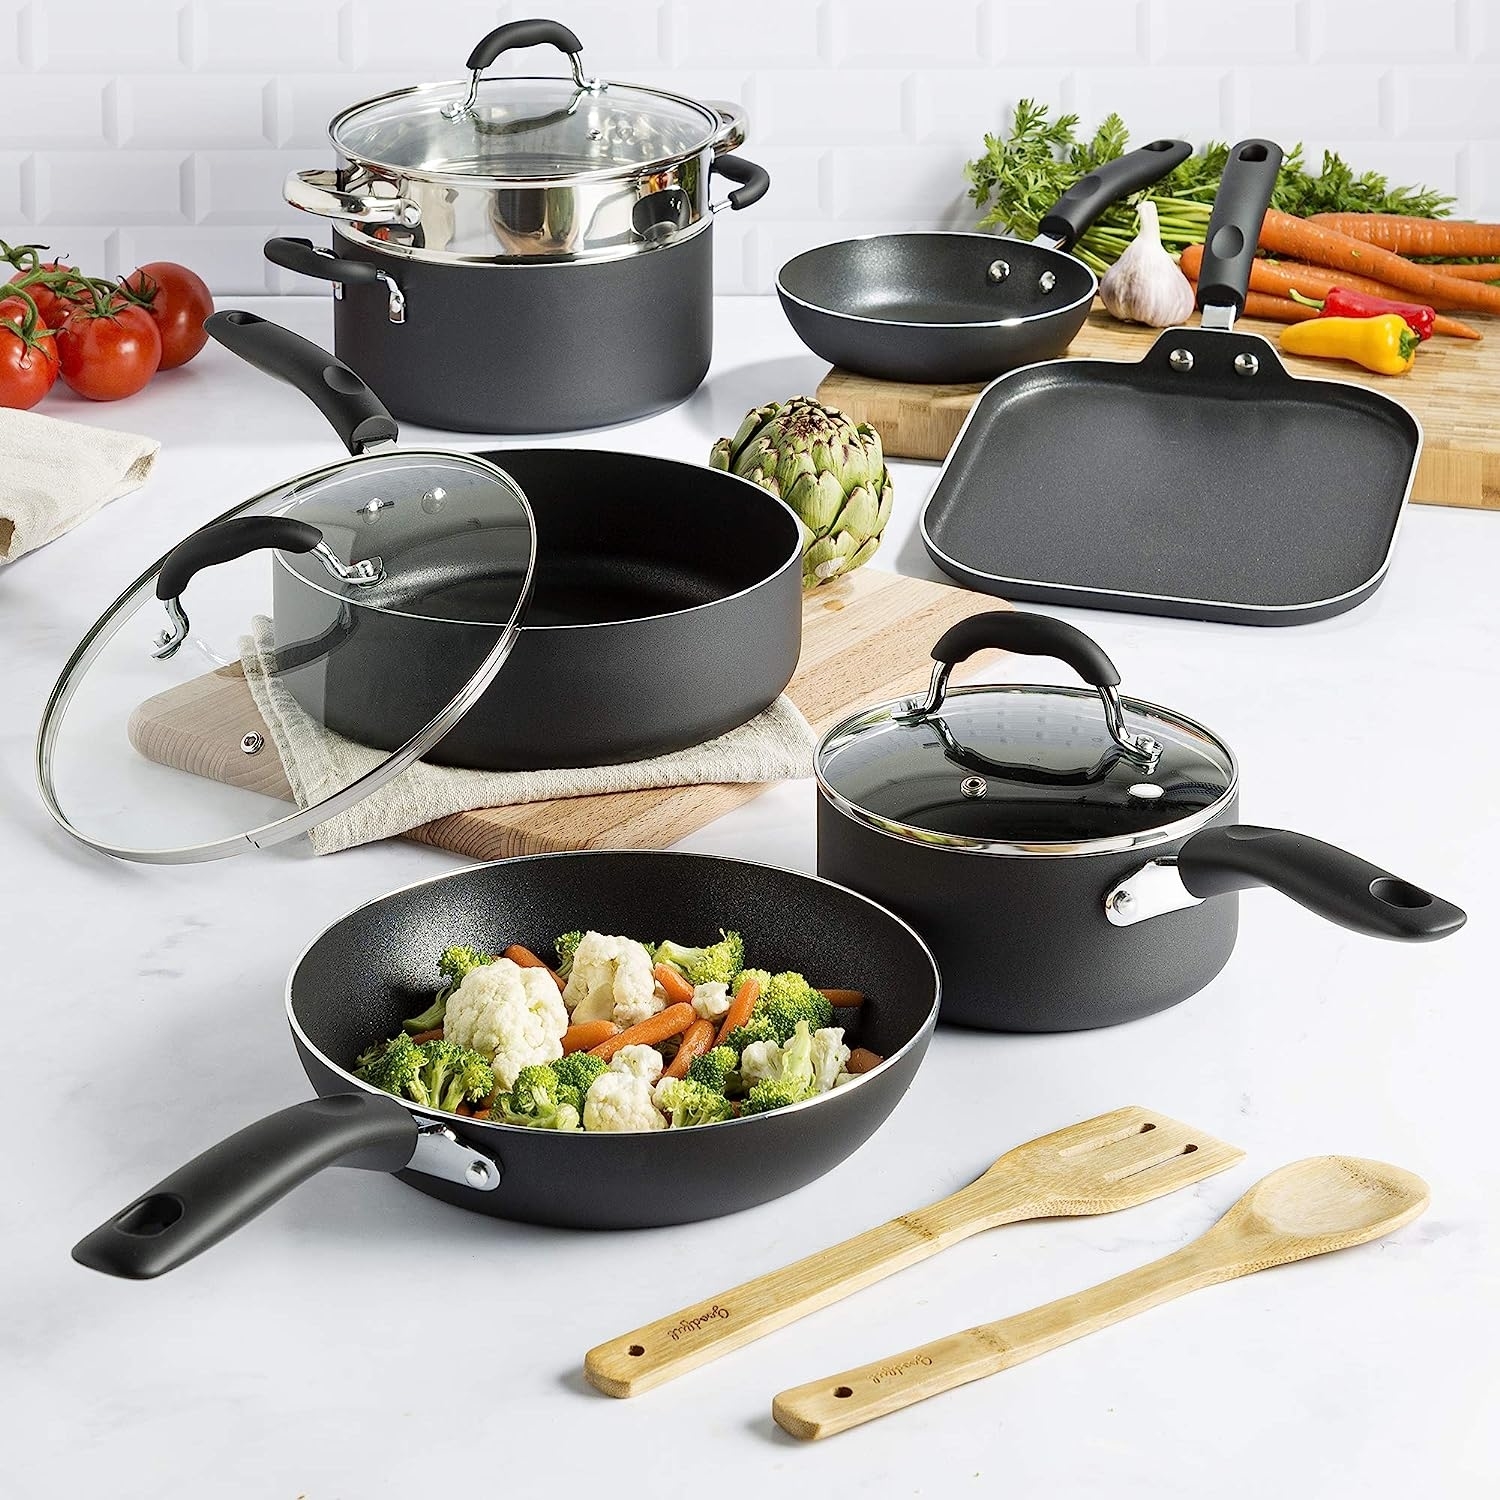 all 12 pieces of the cookware set